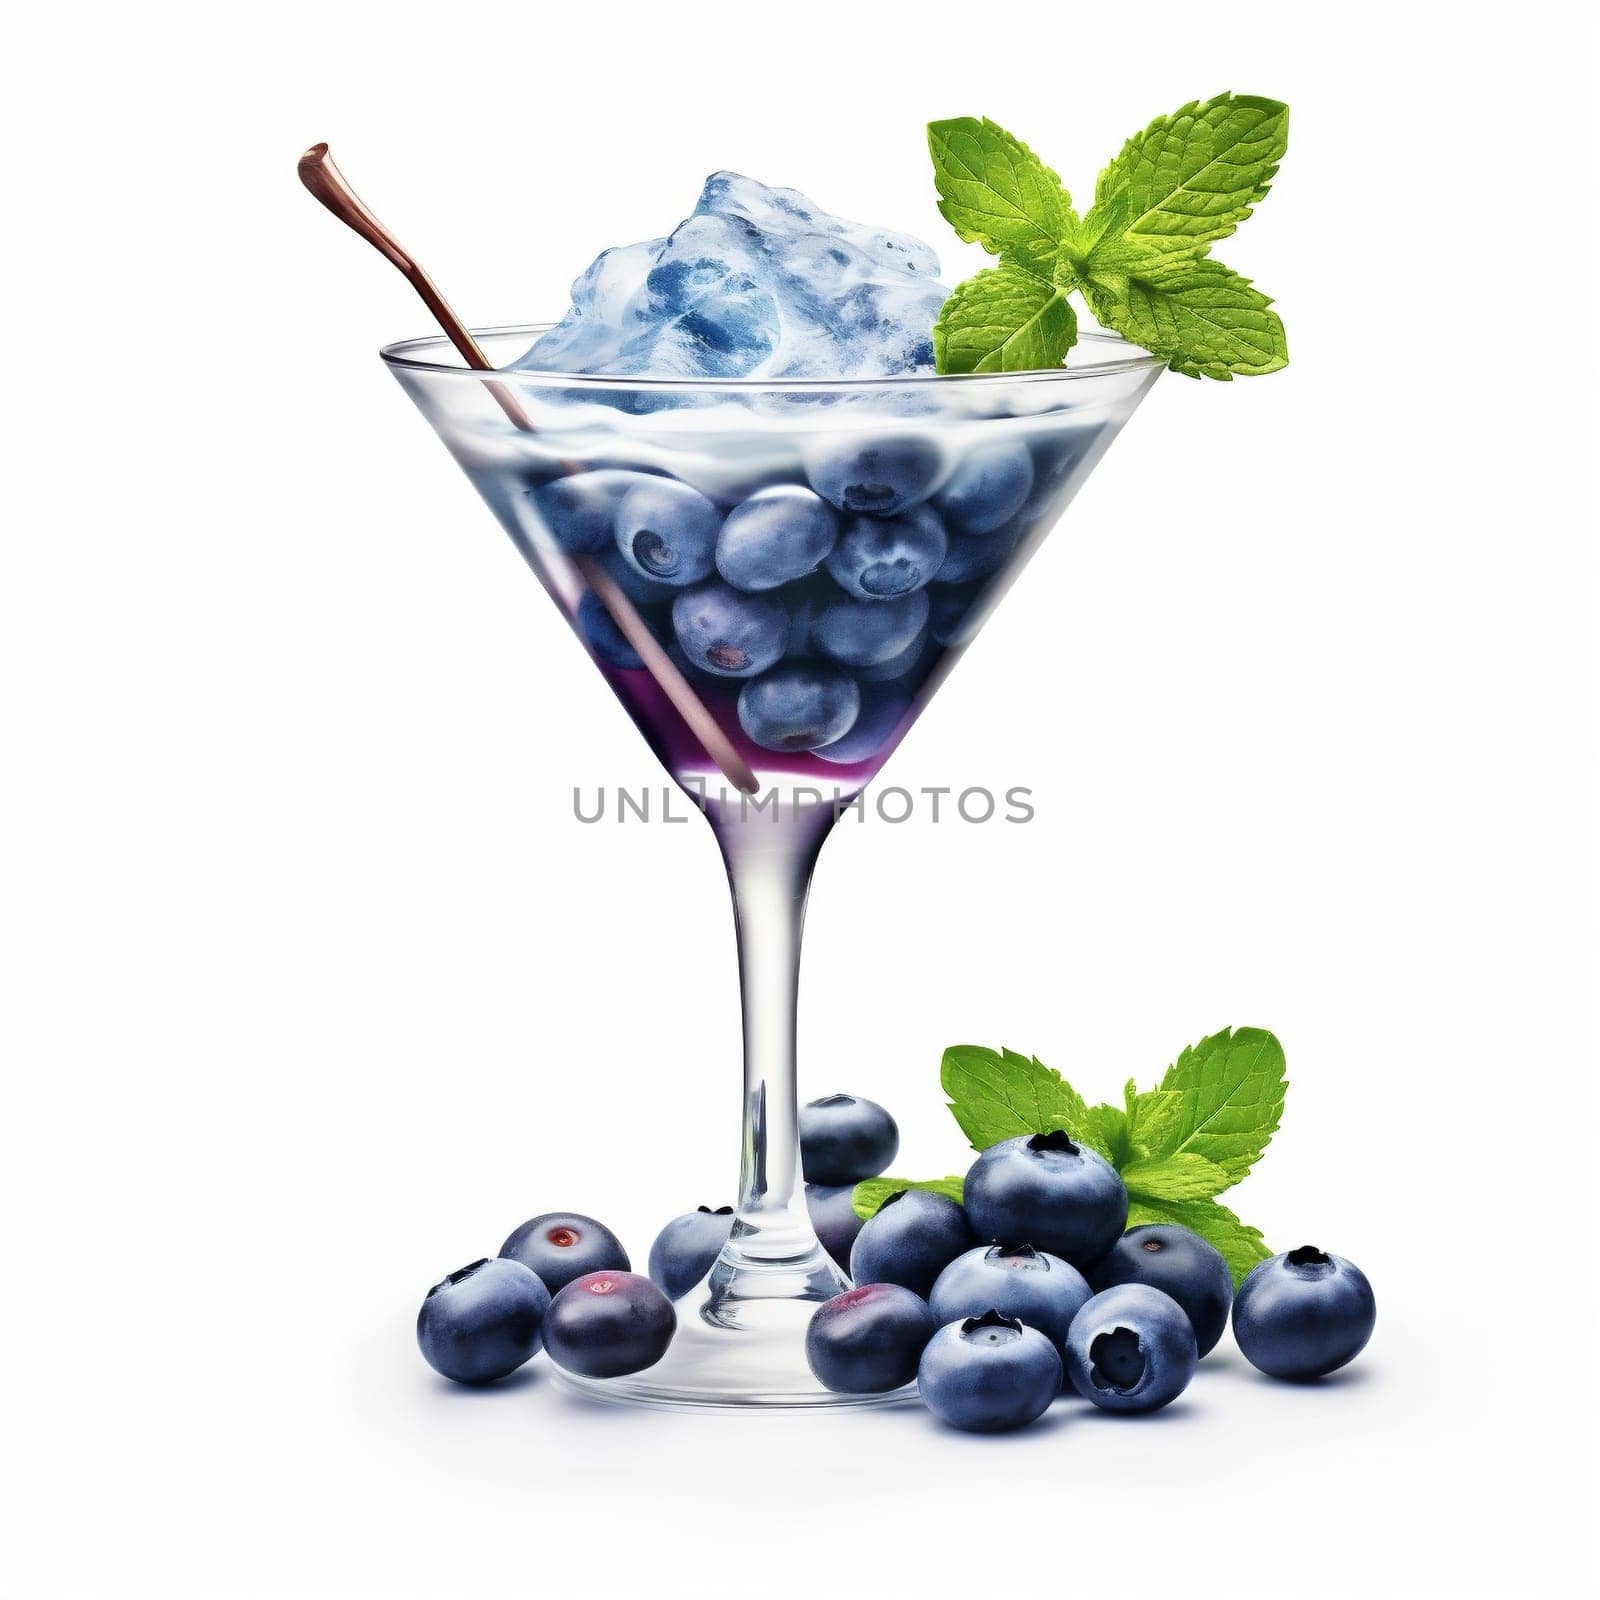 Cocktail Day with Blueberry, Lemon and Mint Leaves. by Rina_Dozornaya